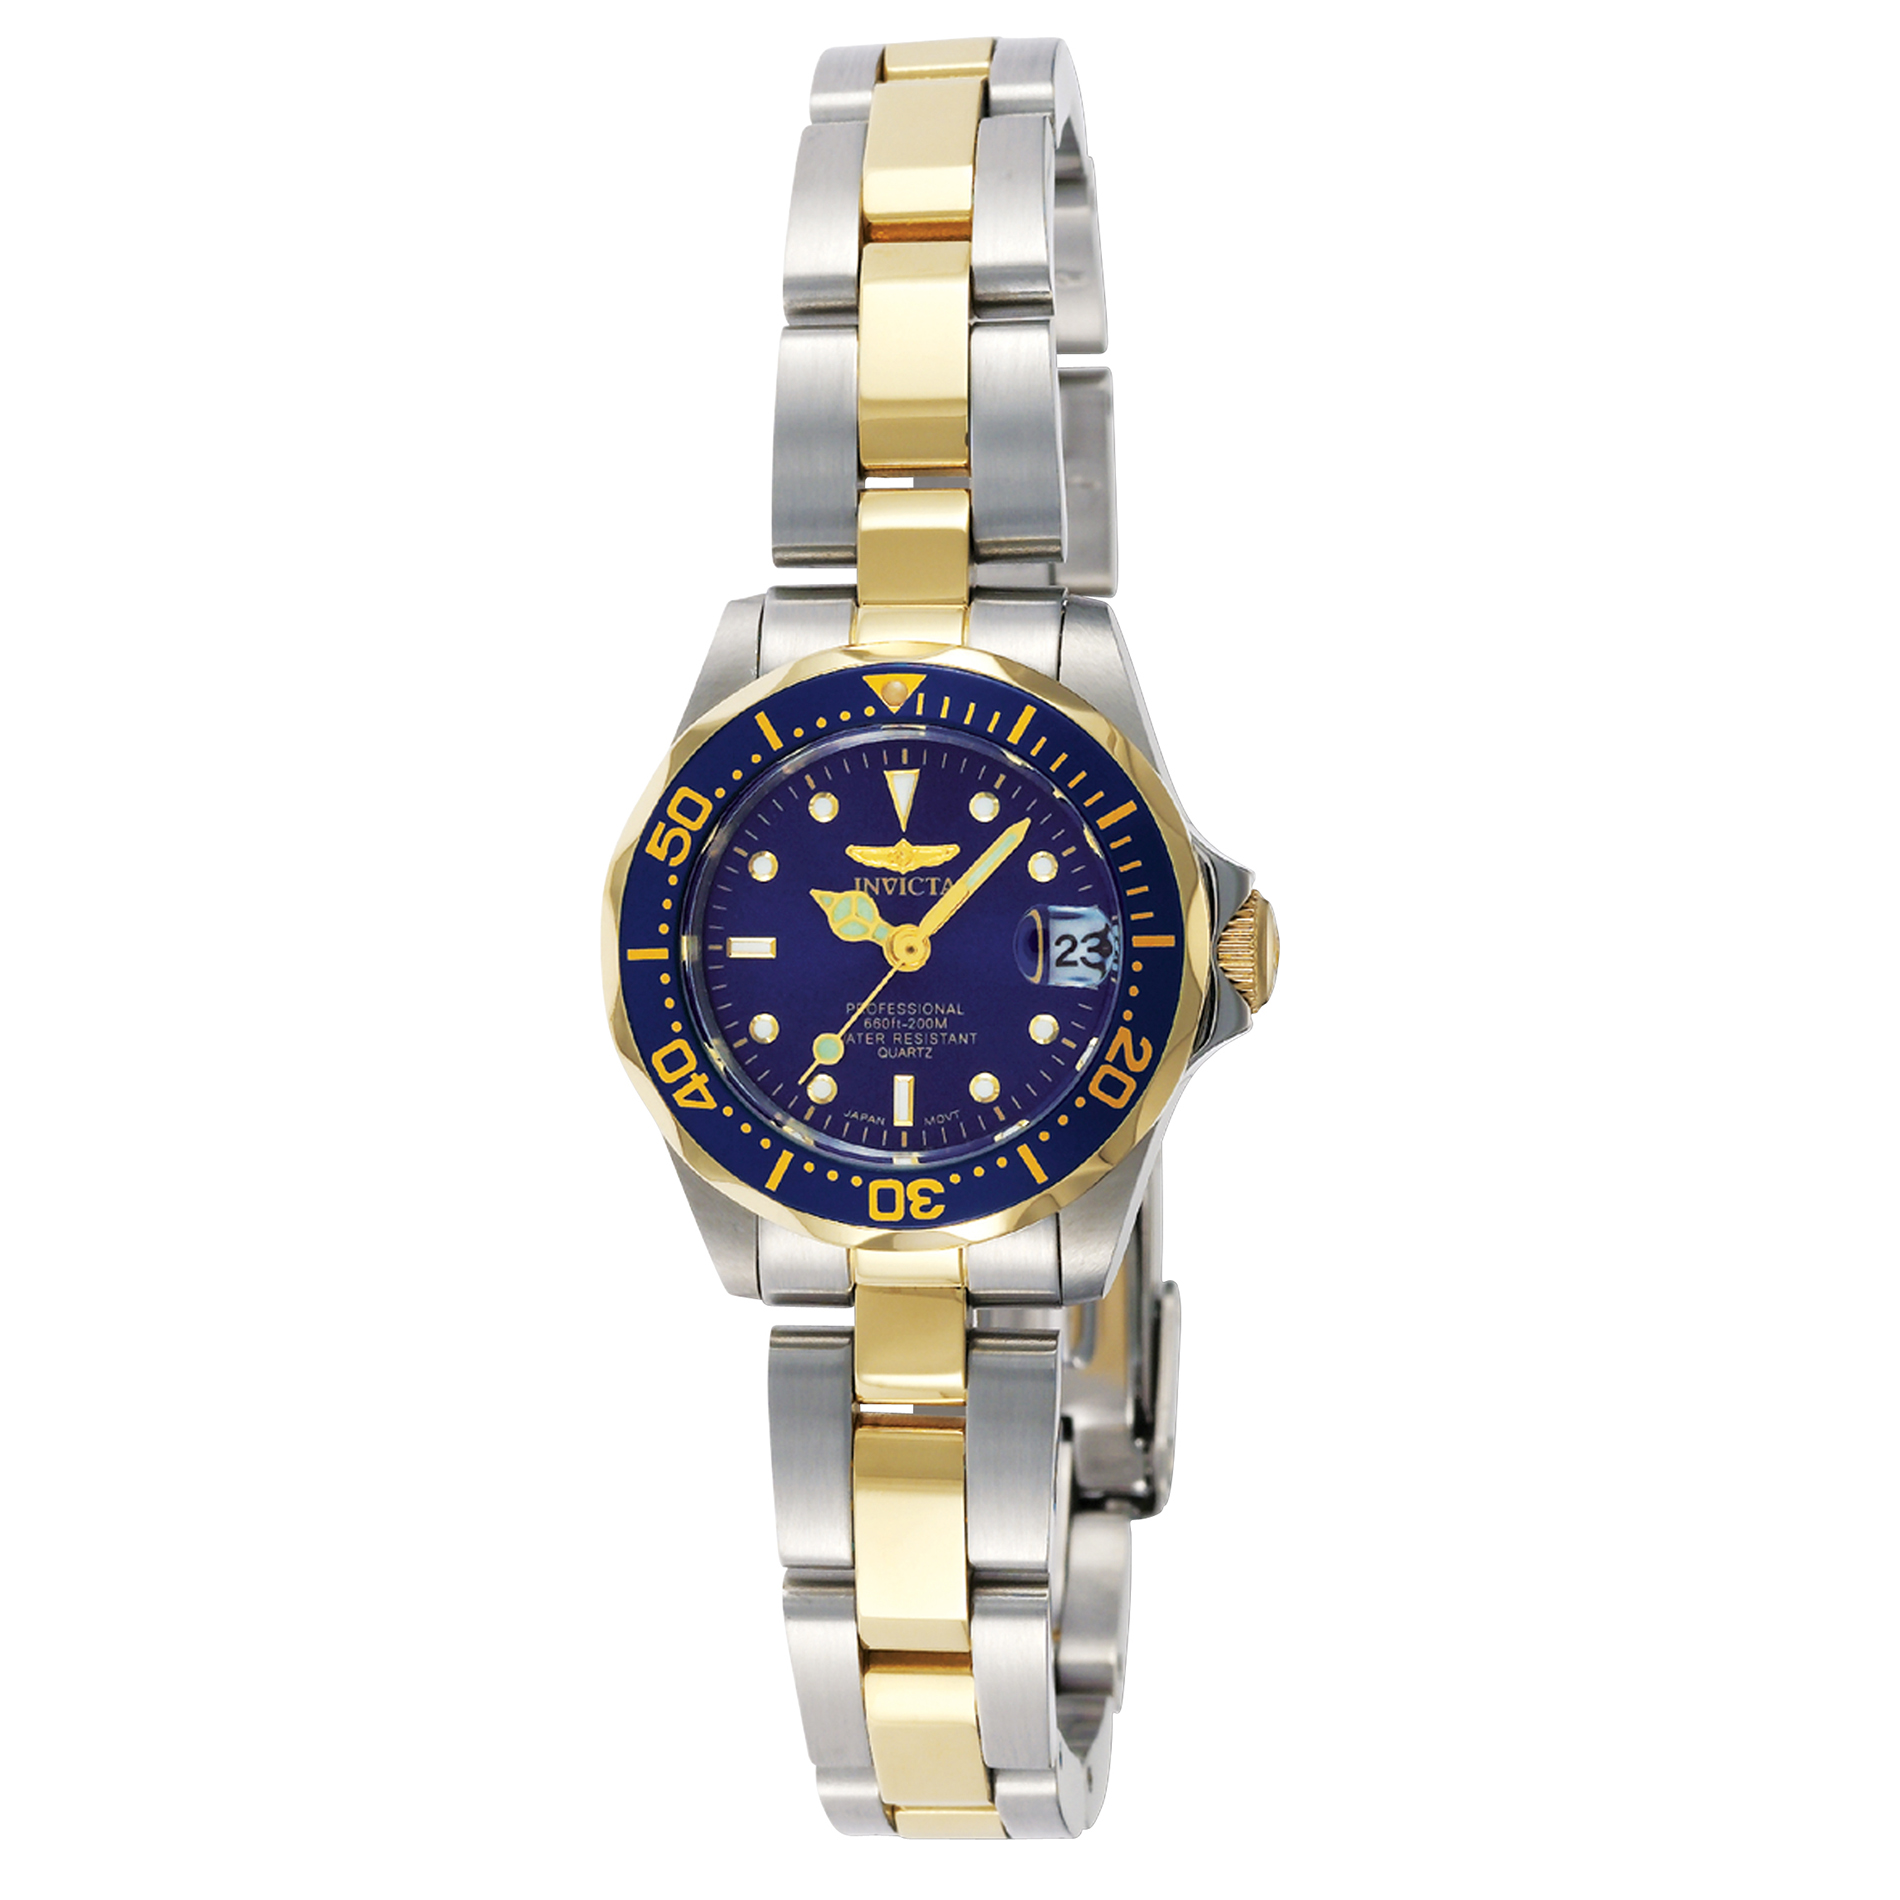 Invicta Women's Dive Watch Clearance, 57% OFF | www.hcb.cat